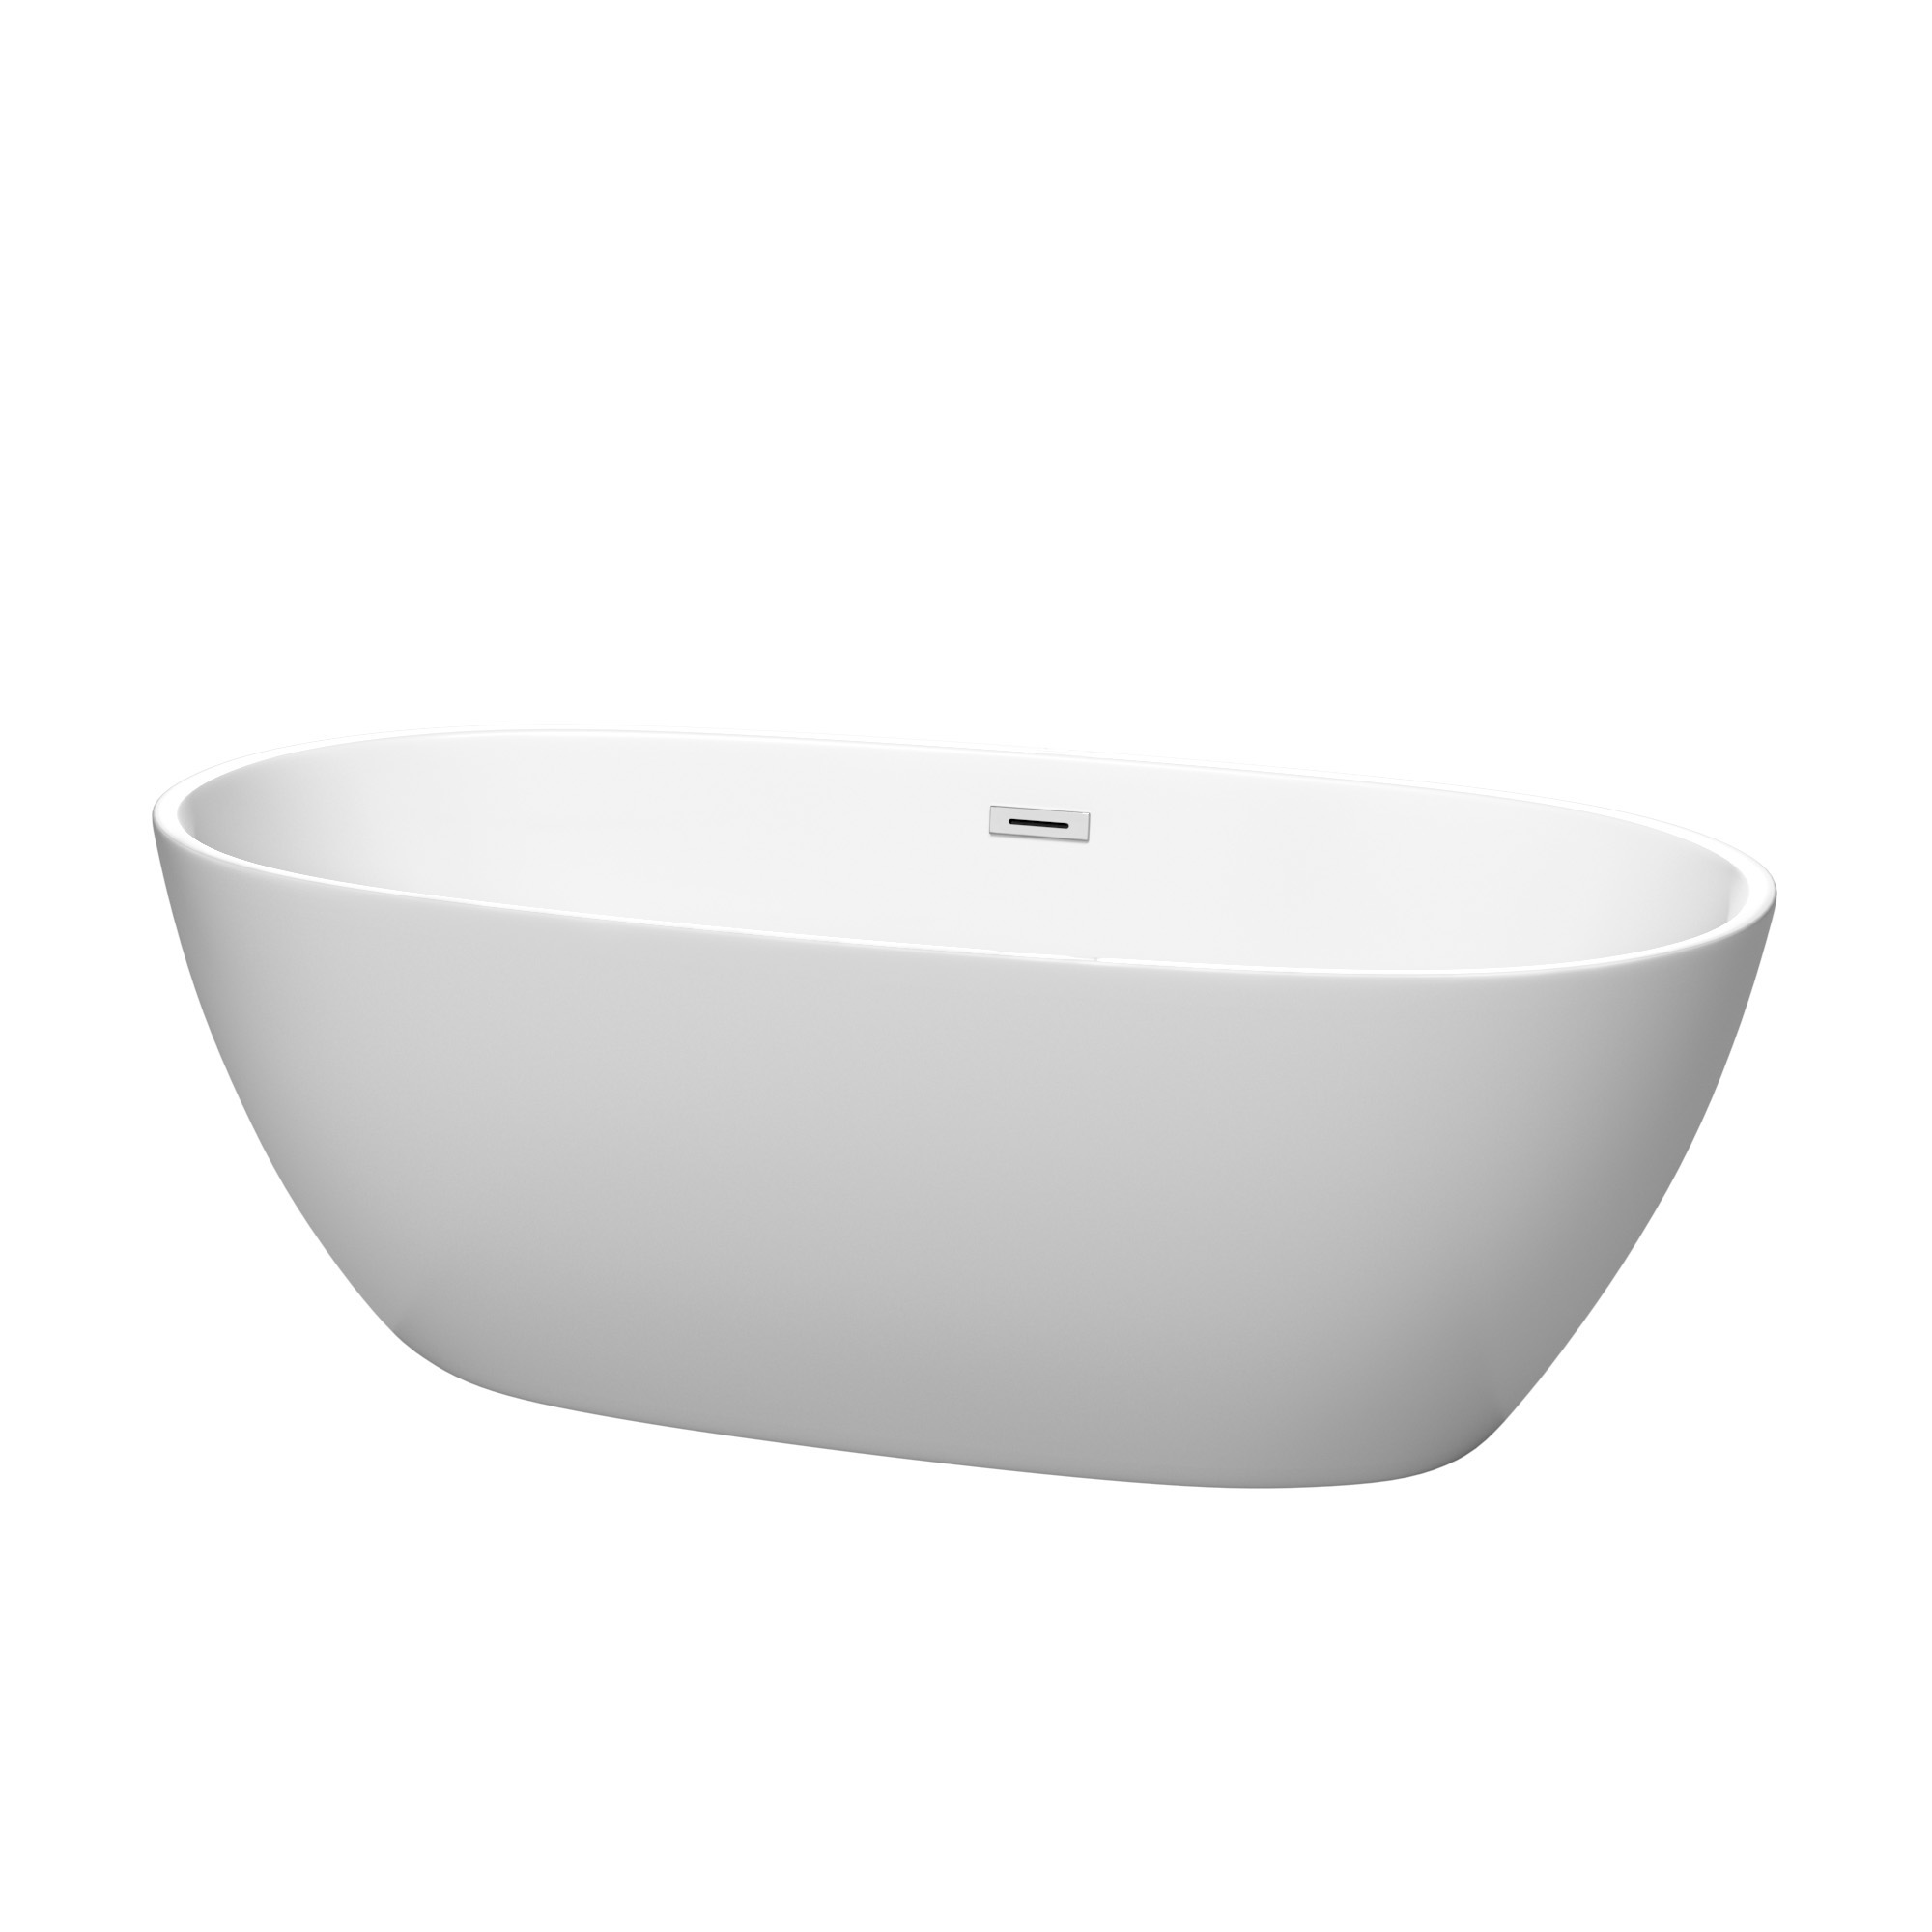 67" Freestanding Bathtub in Matte White with Polished Chrome Drain and Overflow Trim